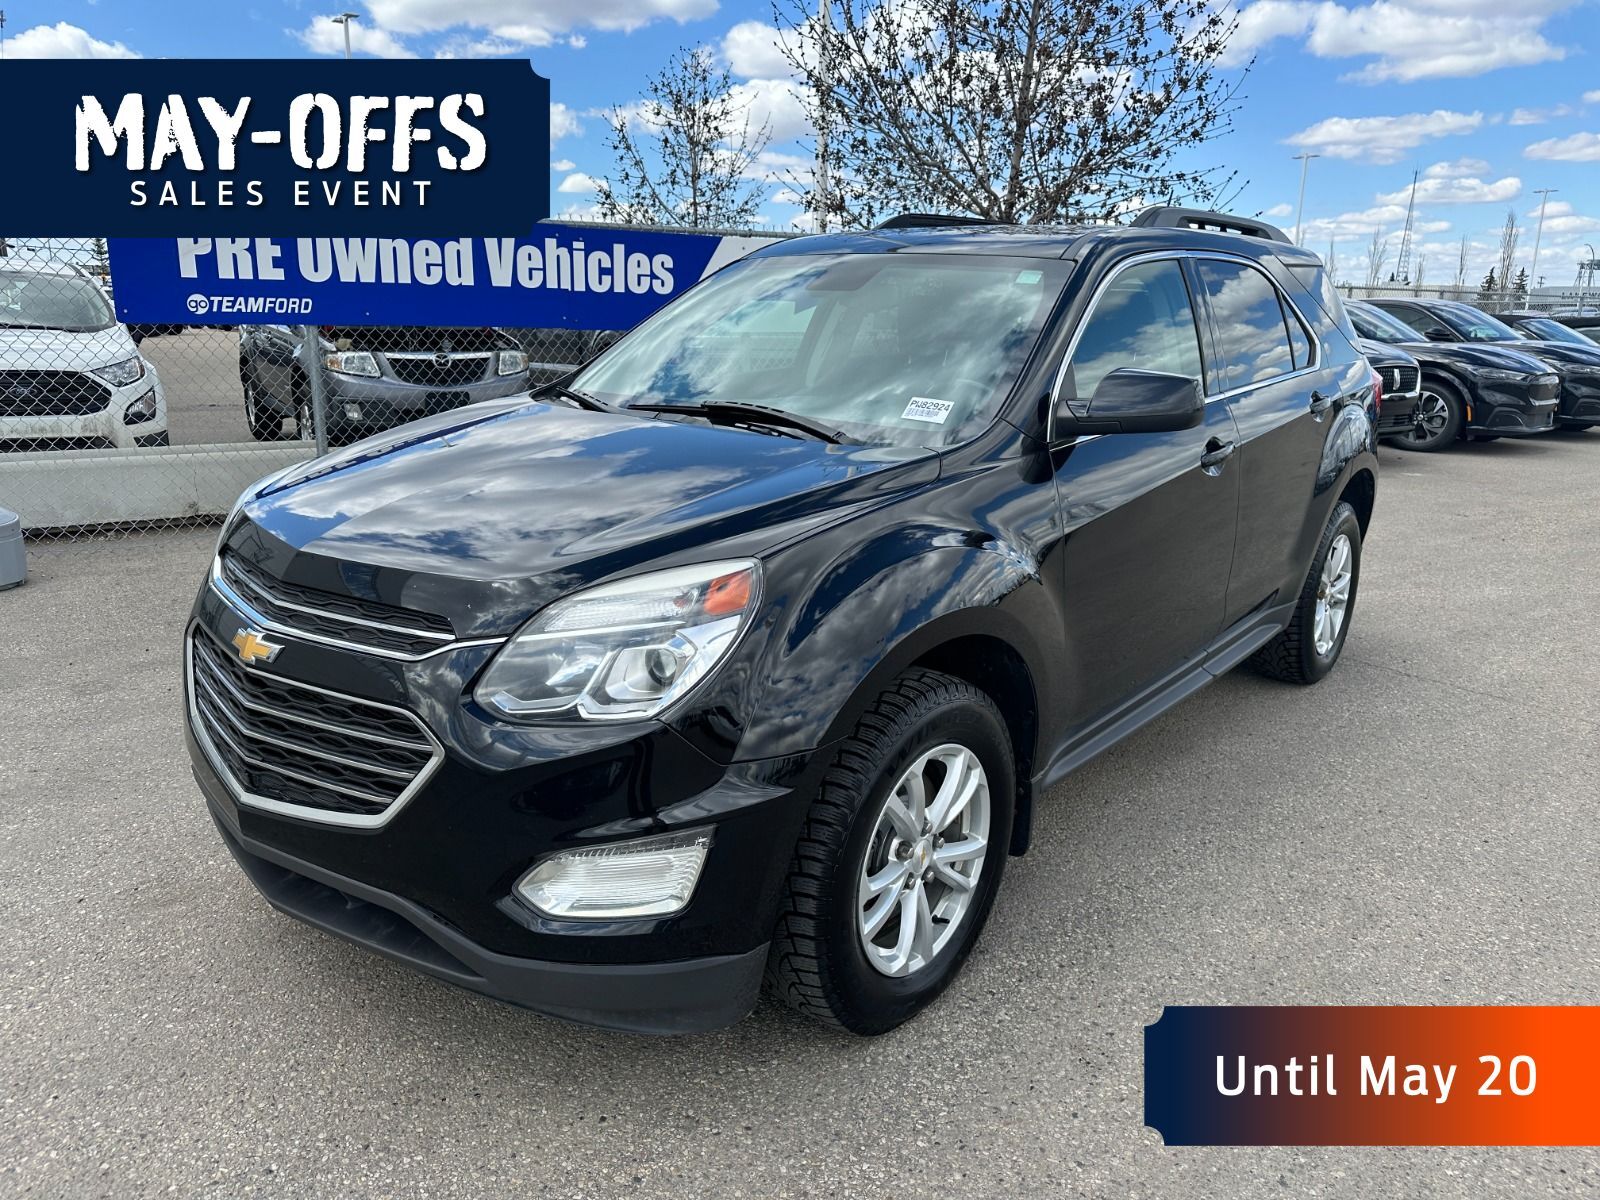 2017 Chevrolet Equinox LT - AWD, CLOTH, POWER OPTIONS, VOICE ACTIVATED SY